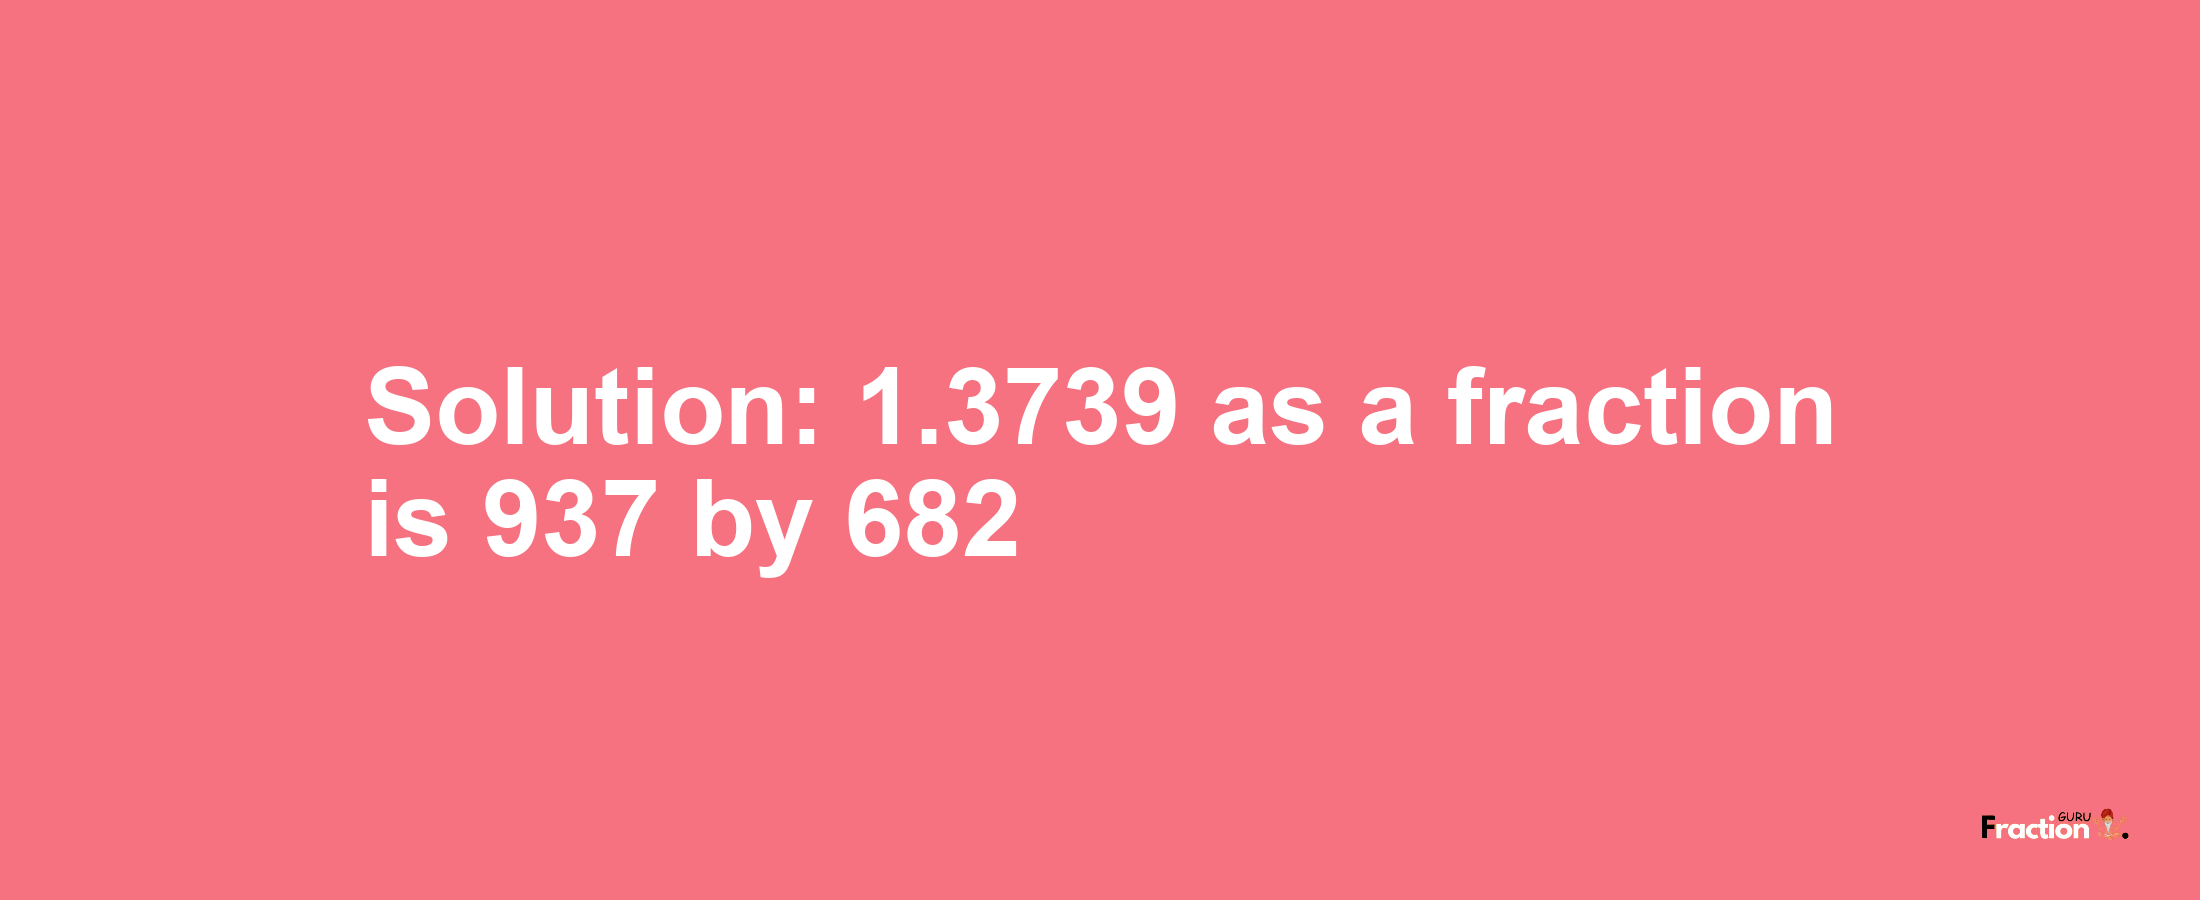 Solution:1.3739 as a fraction is 937/682